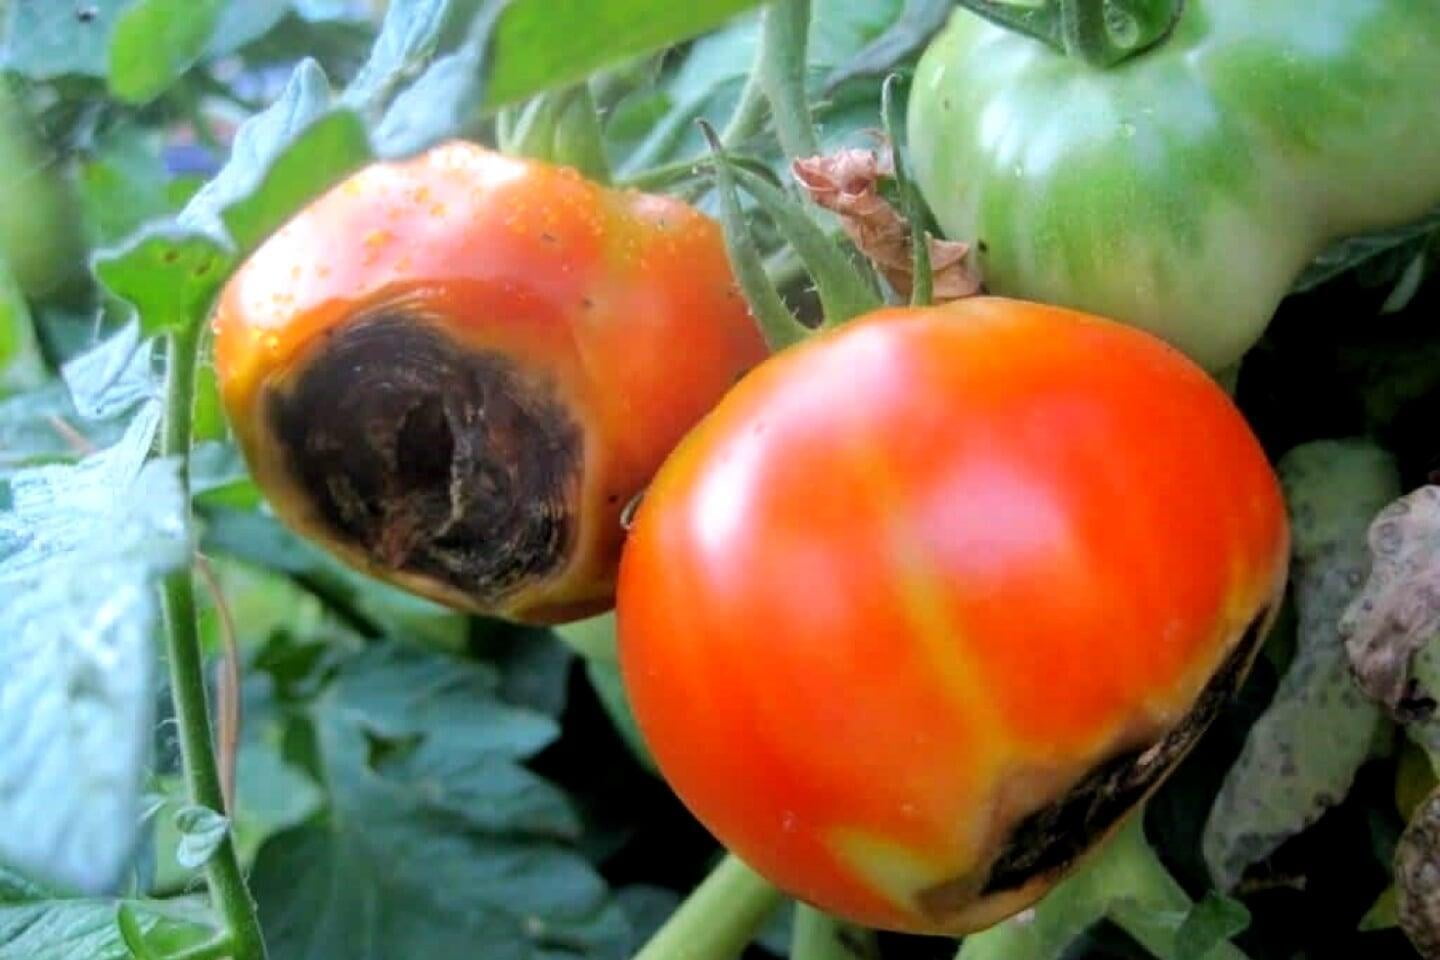 Understanding Physiological Diseases in Plants - Blossom End Rot in Tomatoes.